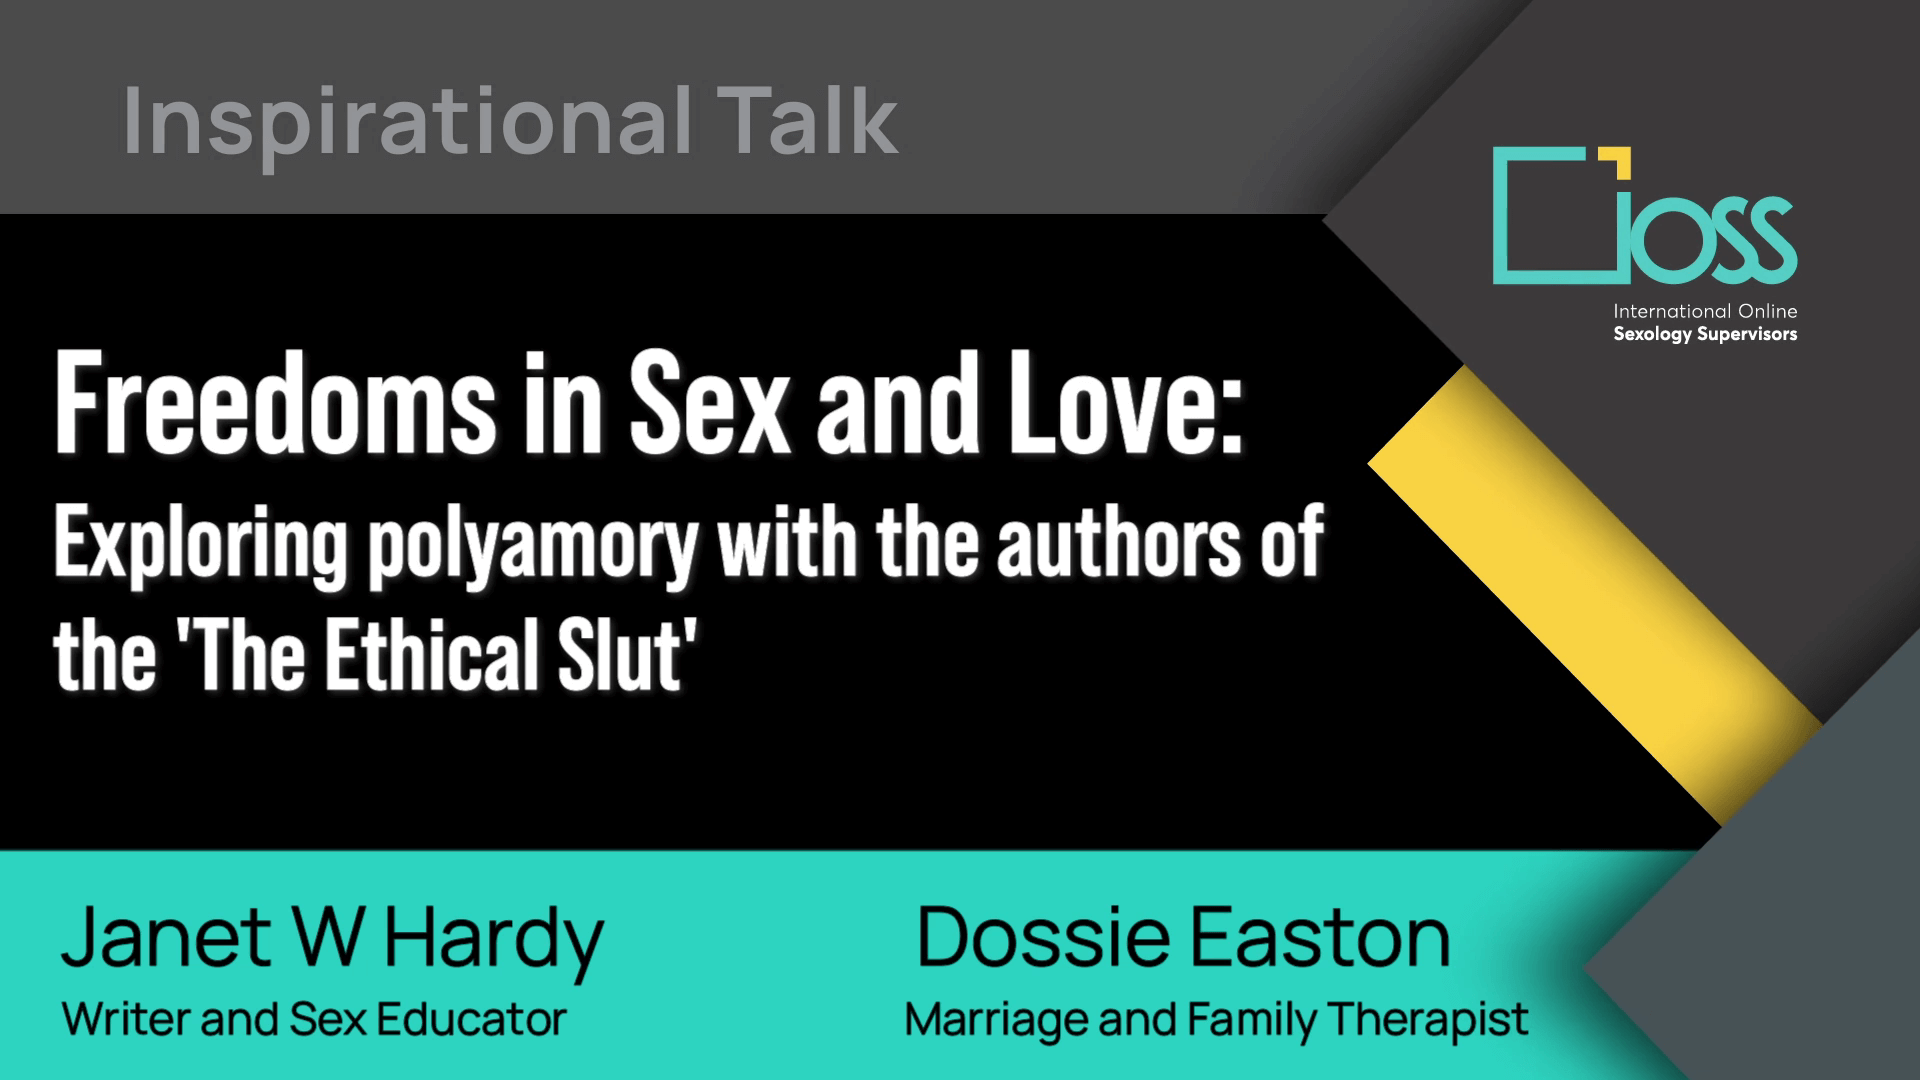 Freedoms in Sex and Love. Exploring Polyamory with the authors of “The ethical slut”